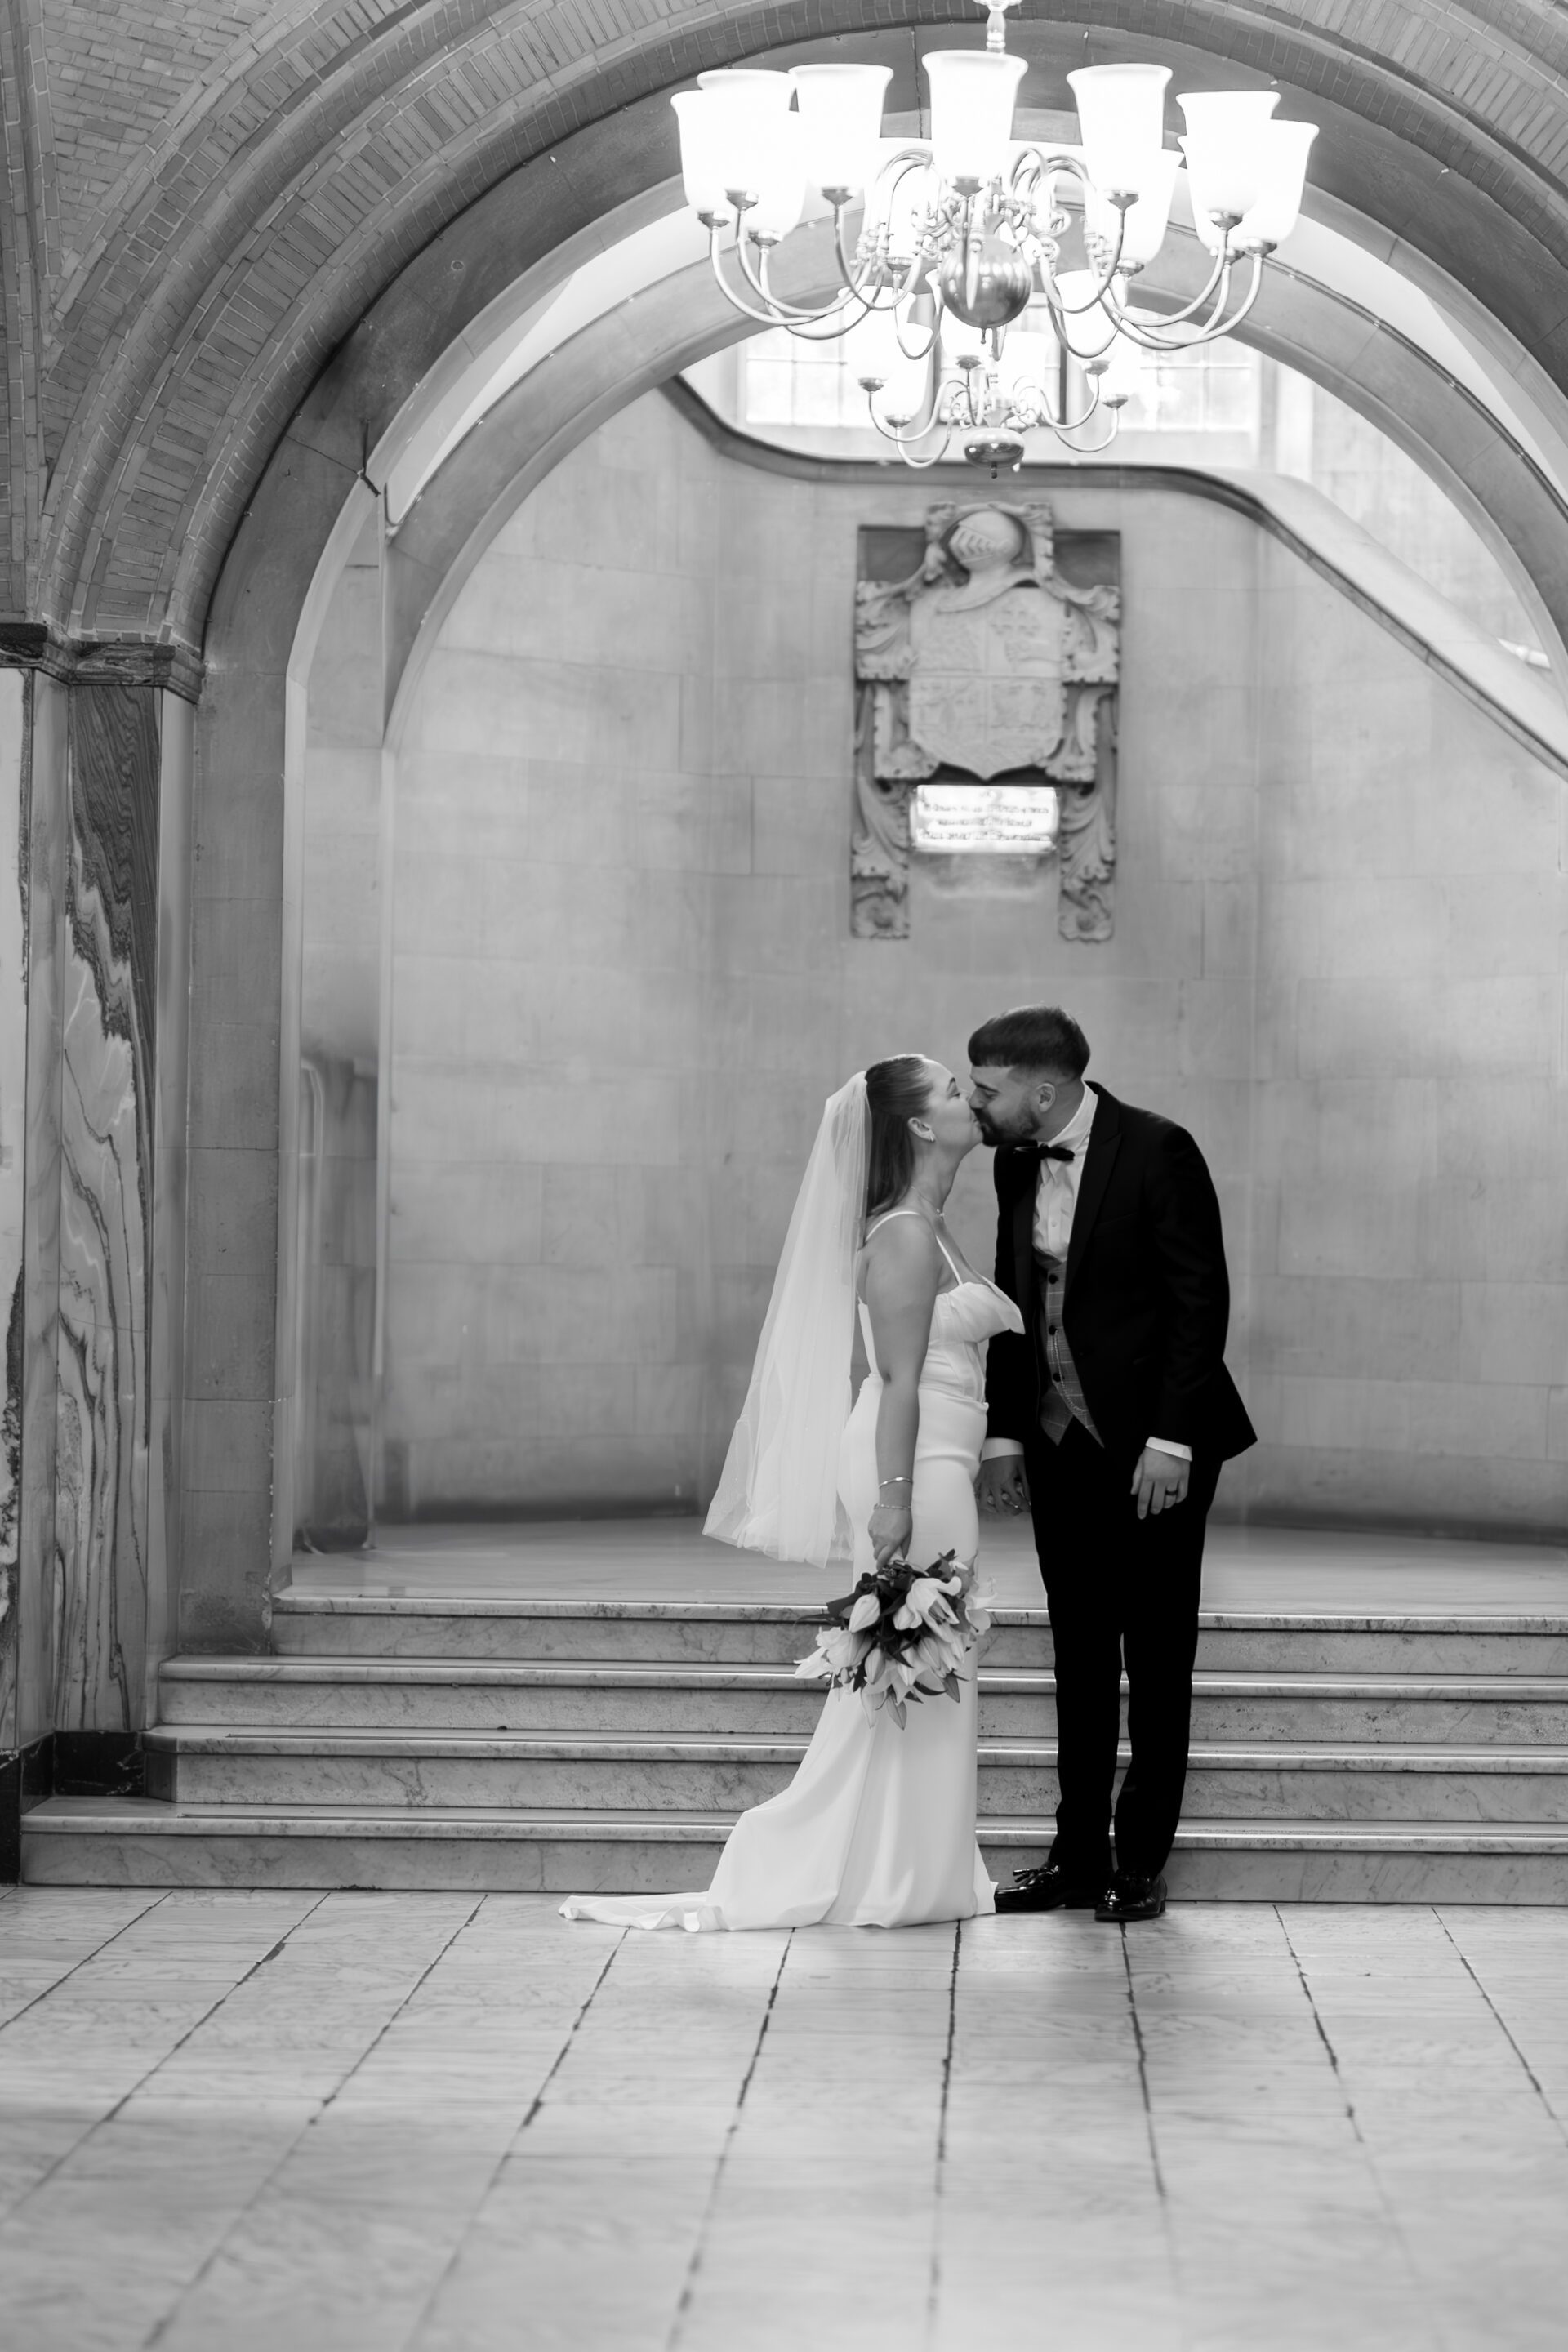 Our bride and groom pose for couple portraits at the iconic Bristol Library